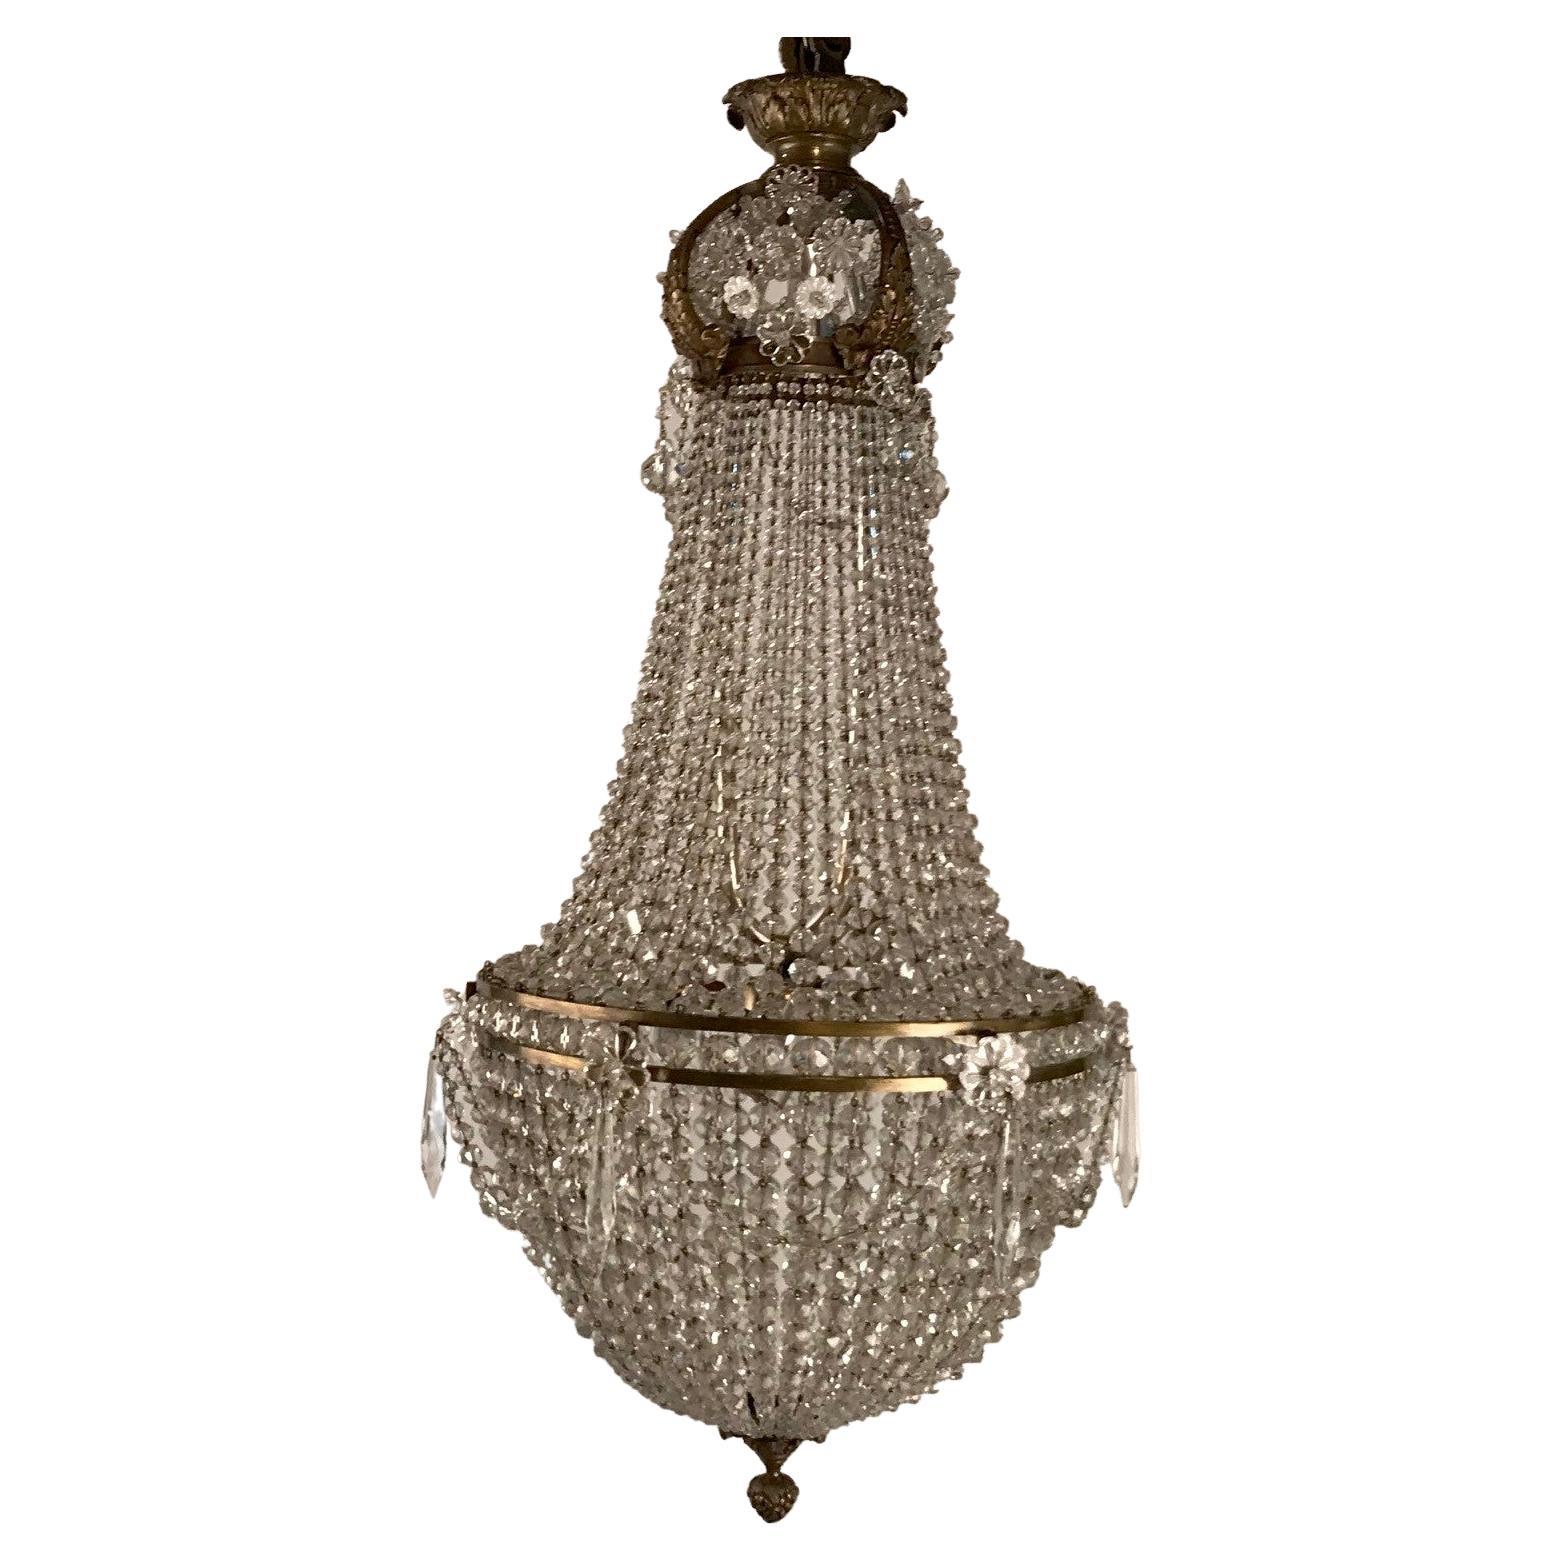 Antique French Louis XVI Basket-Shaped Chandelier